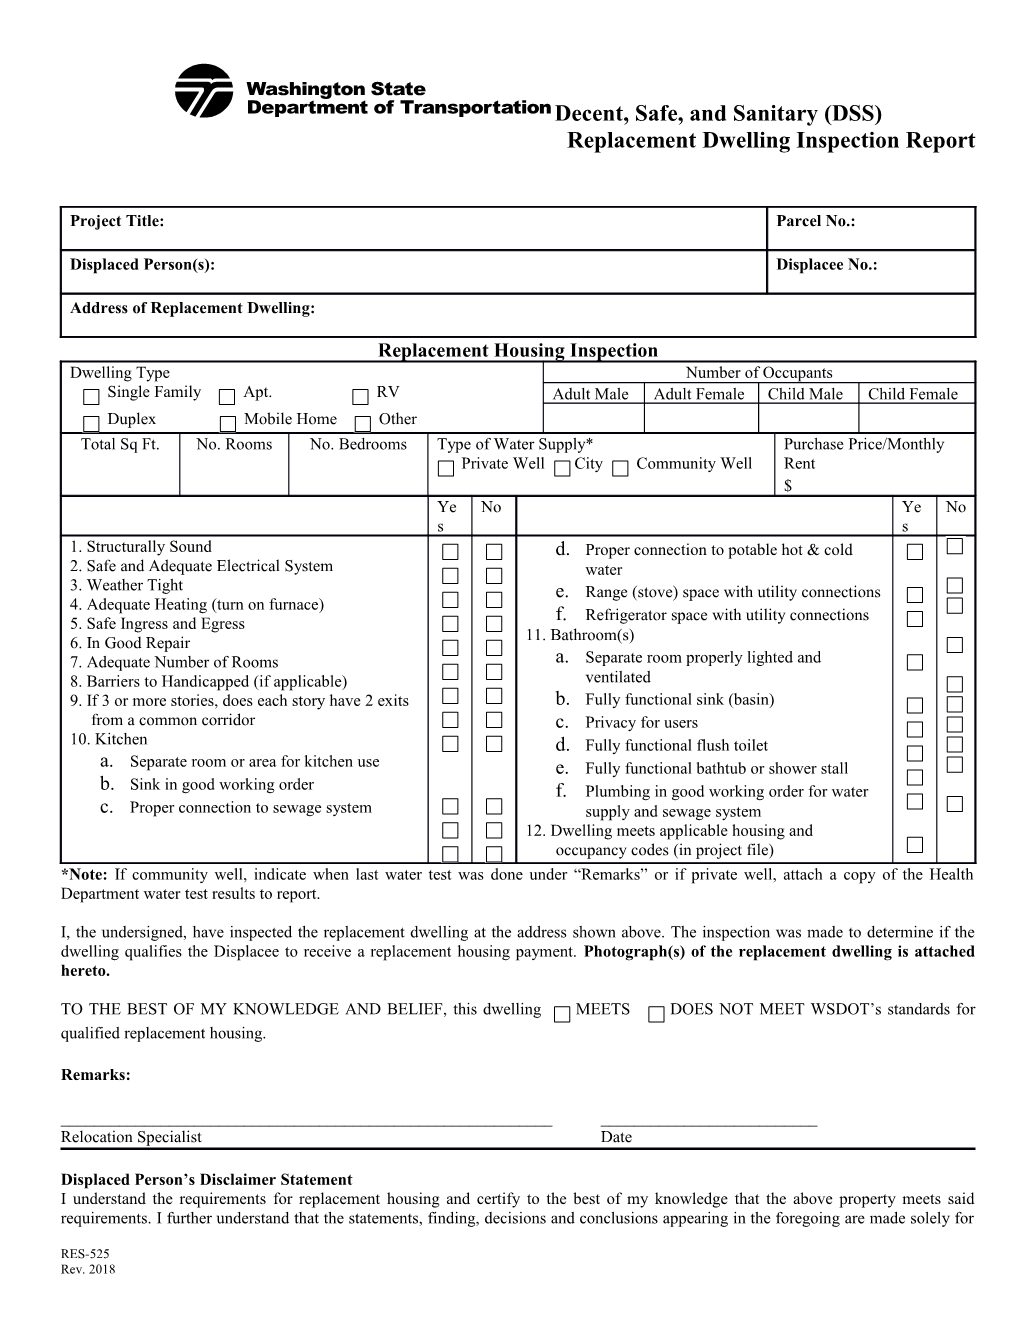 RES 525 (DSS) Replacement Dwelling Inspection Report